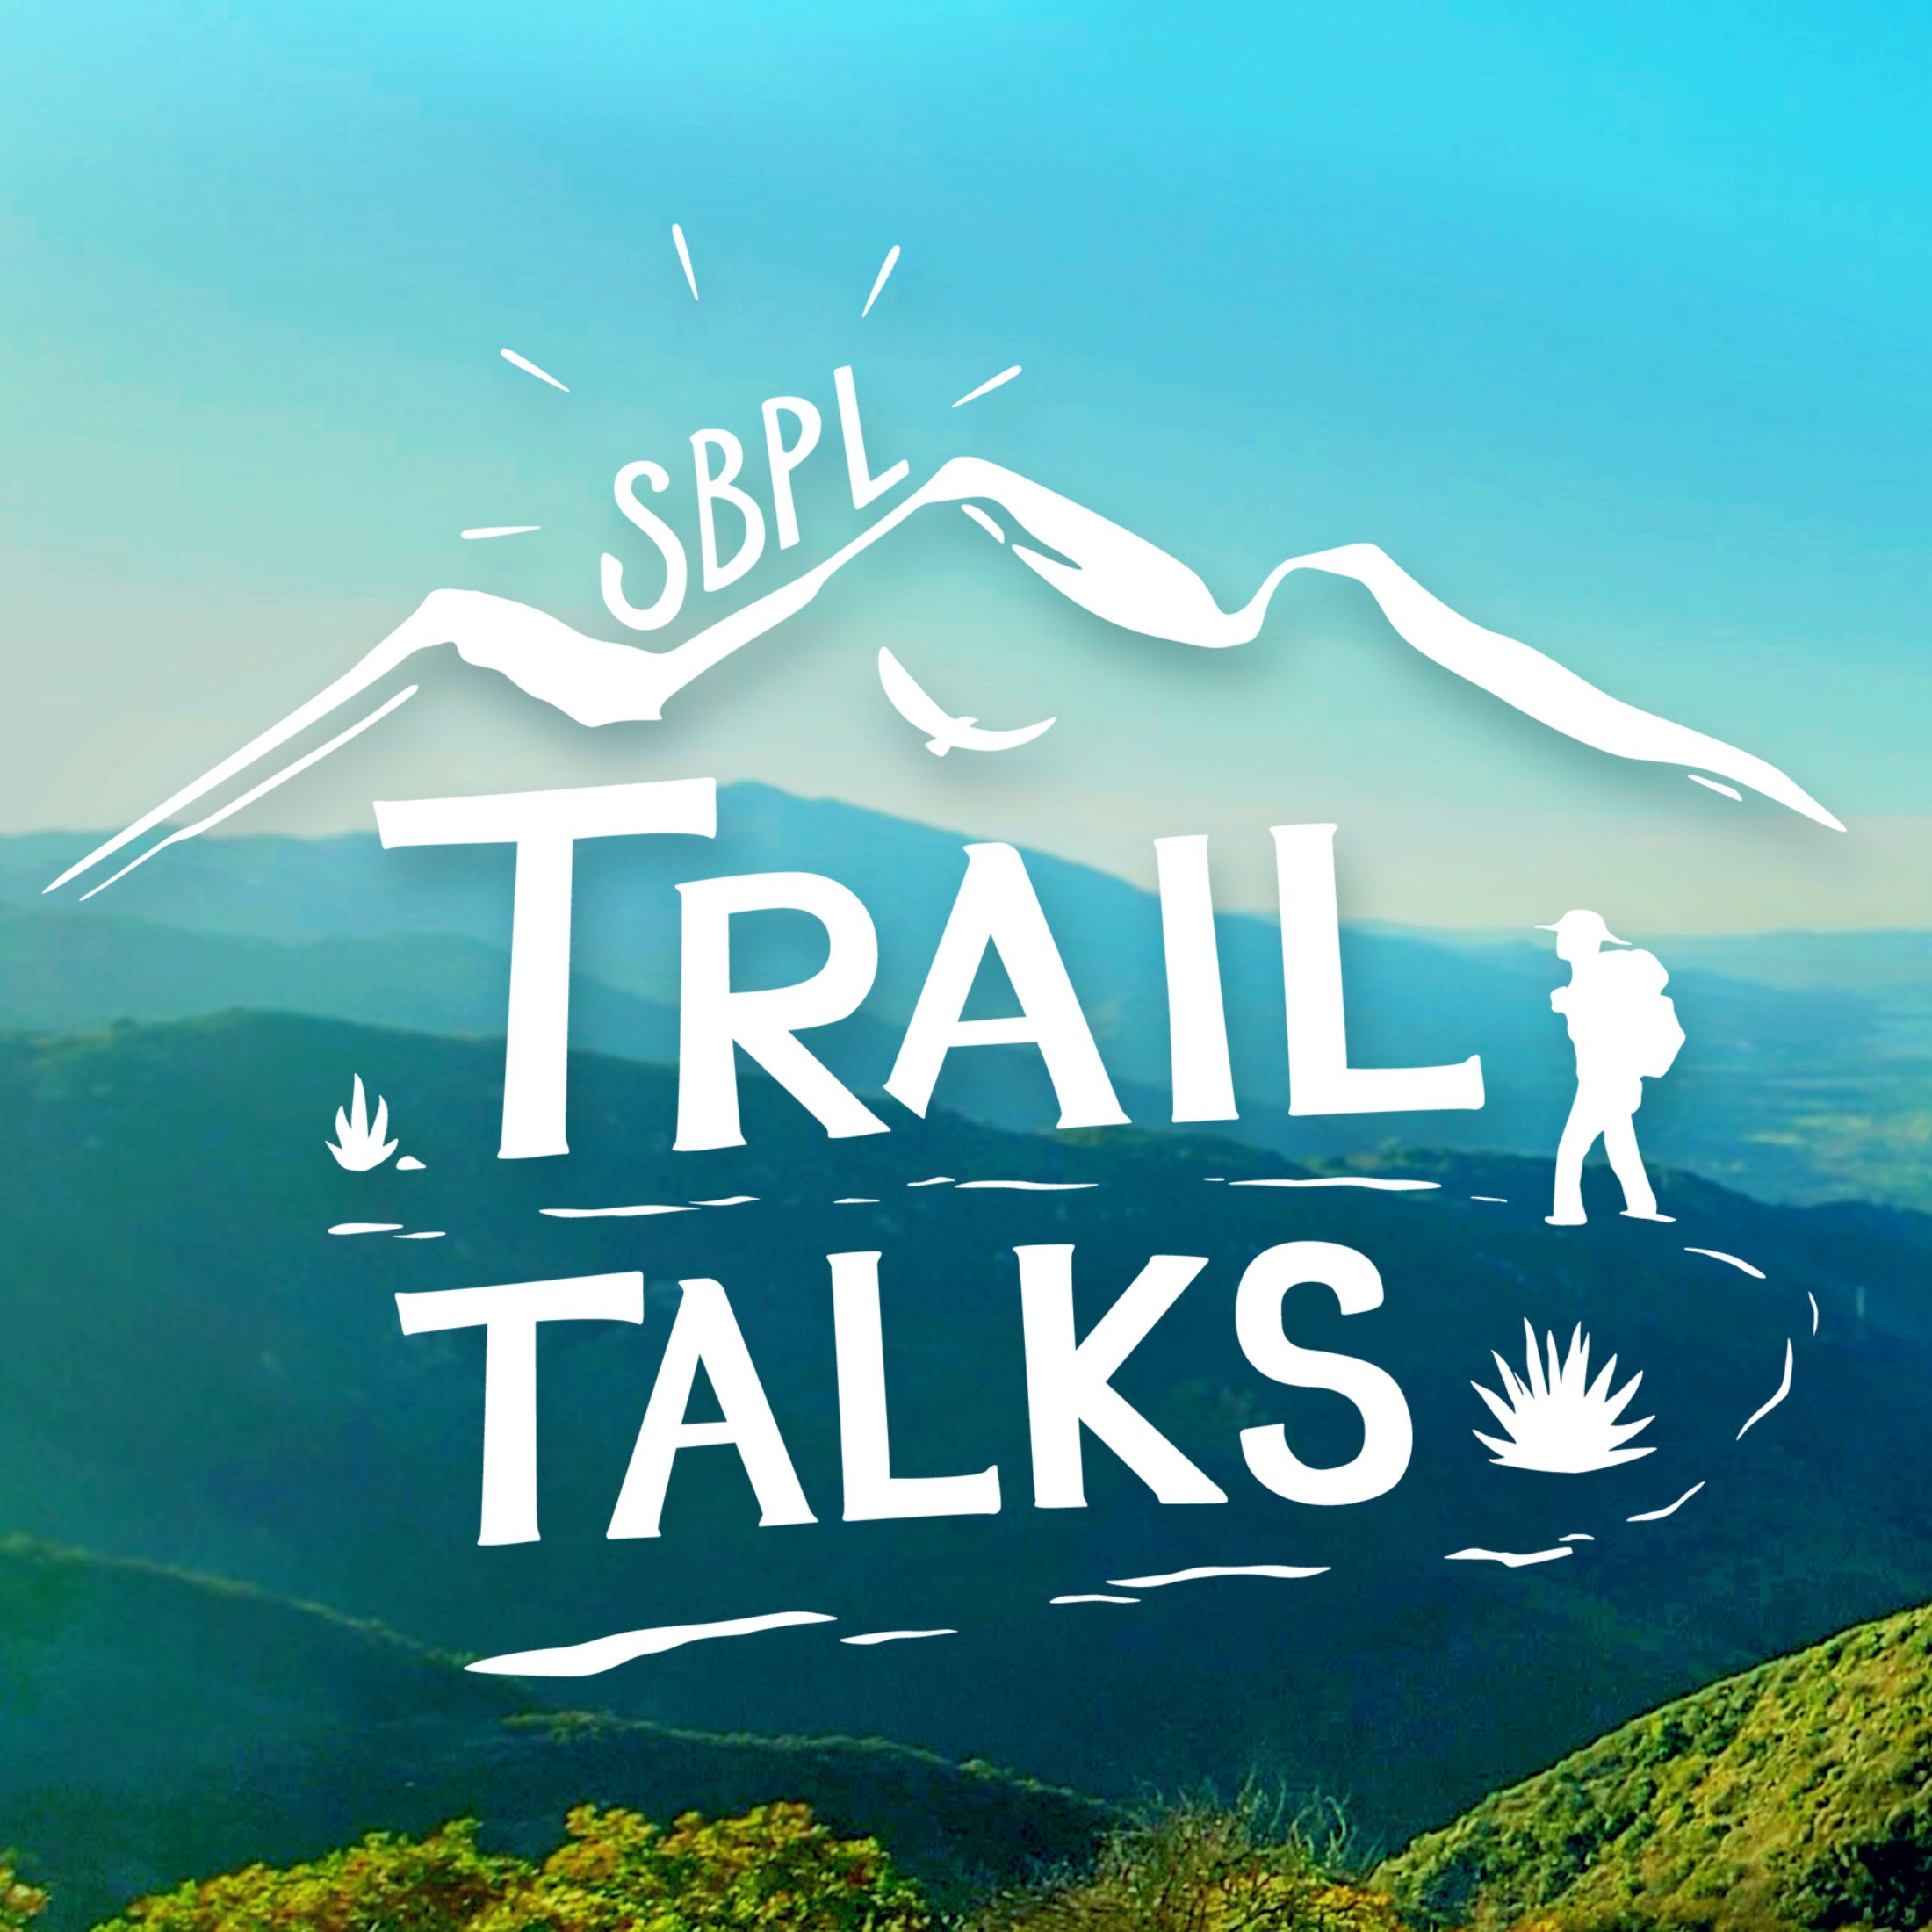 trail talks logo with mountain background